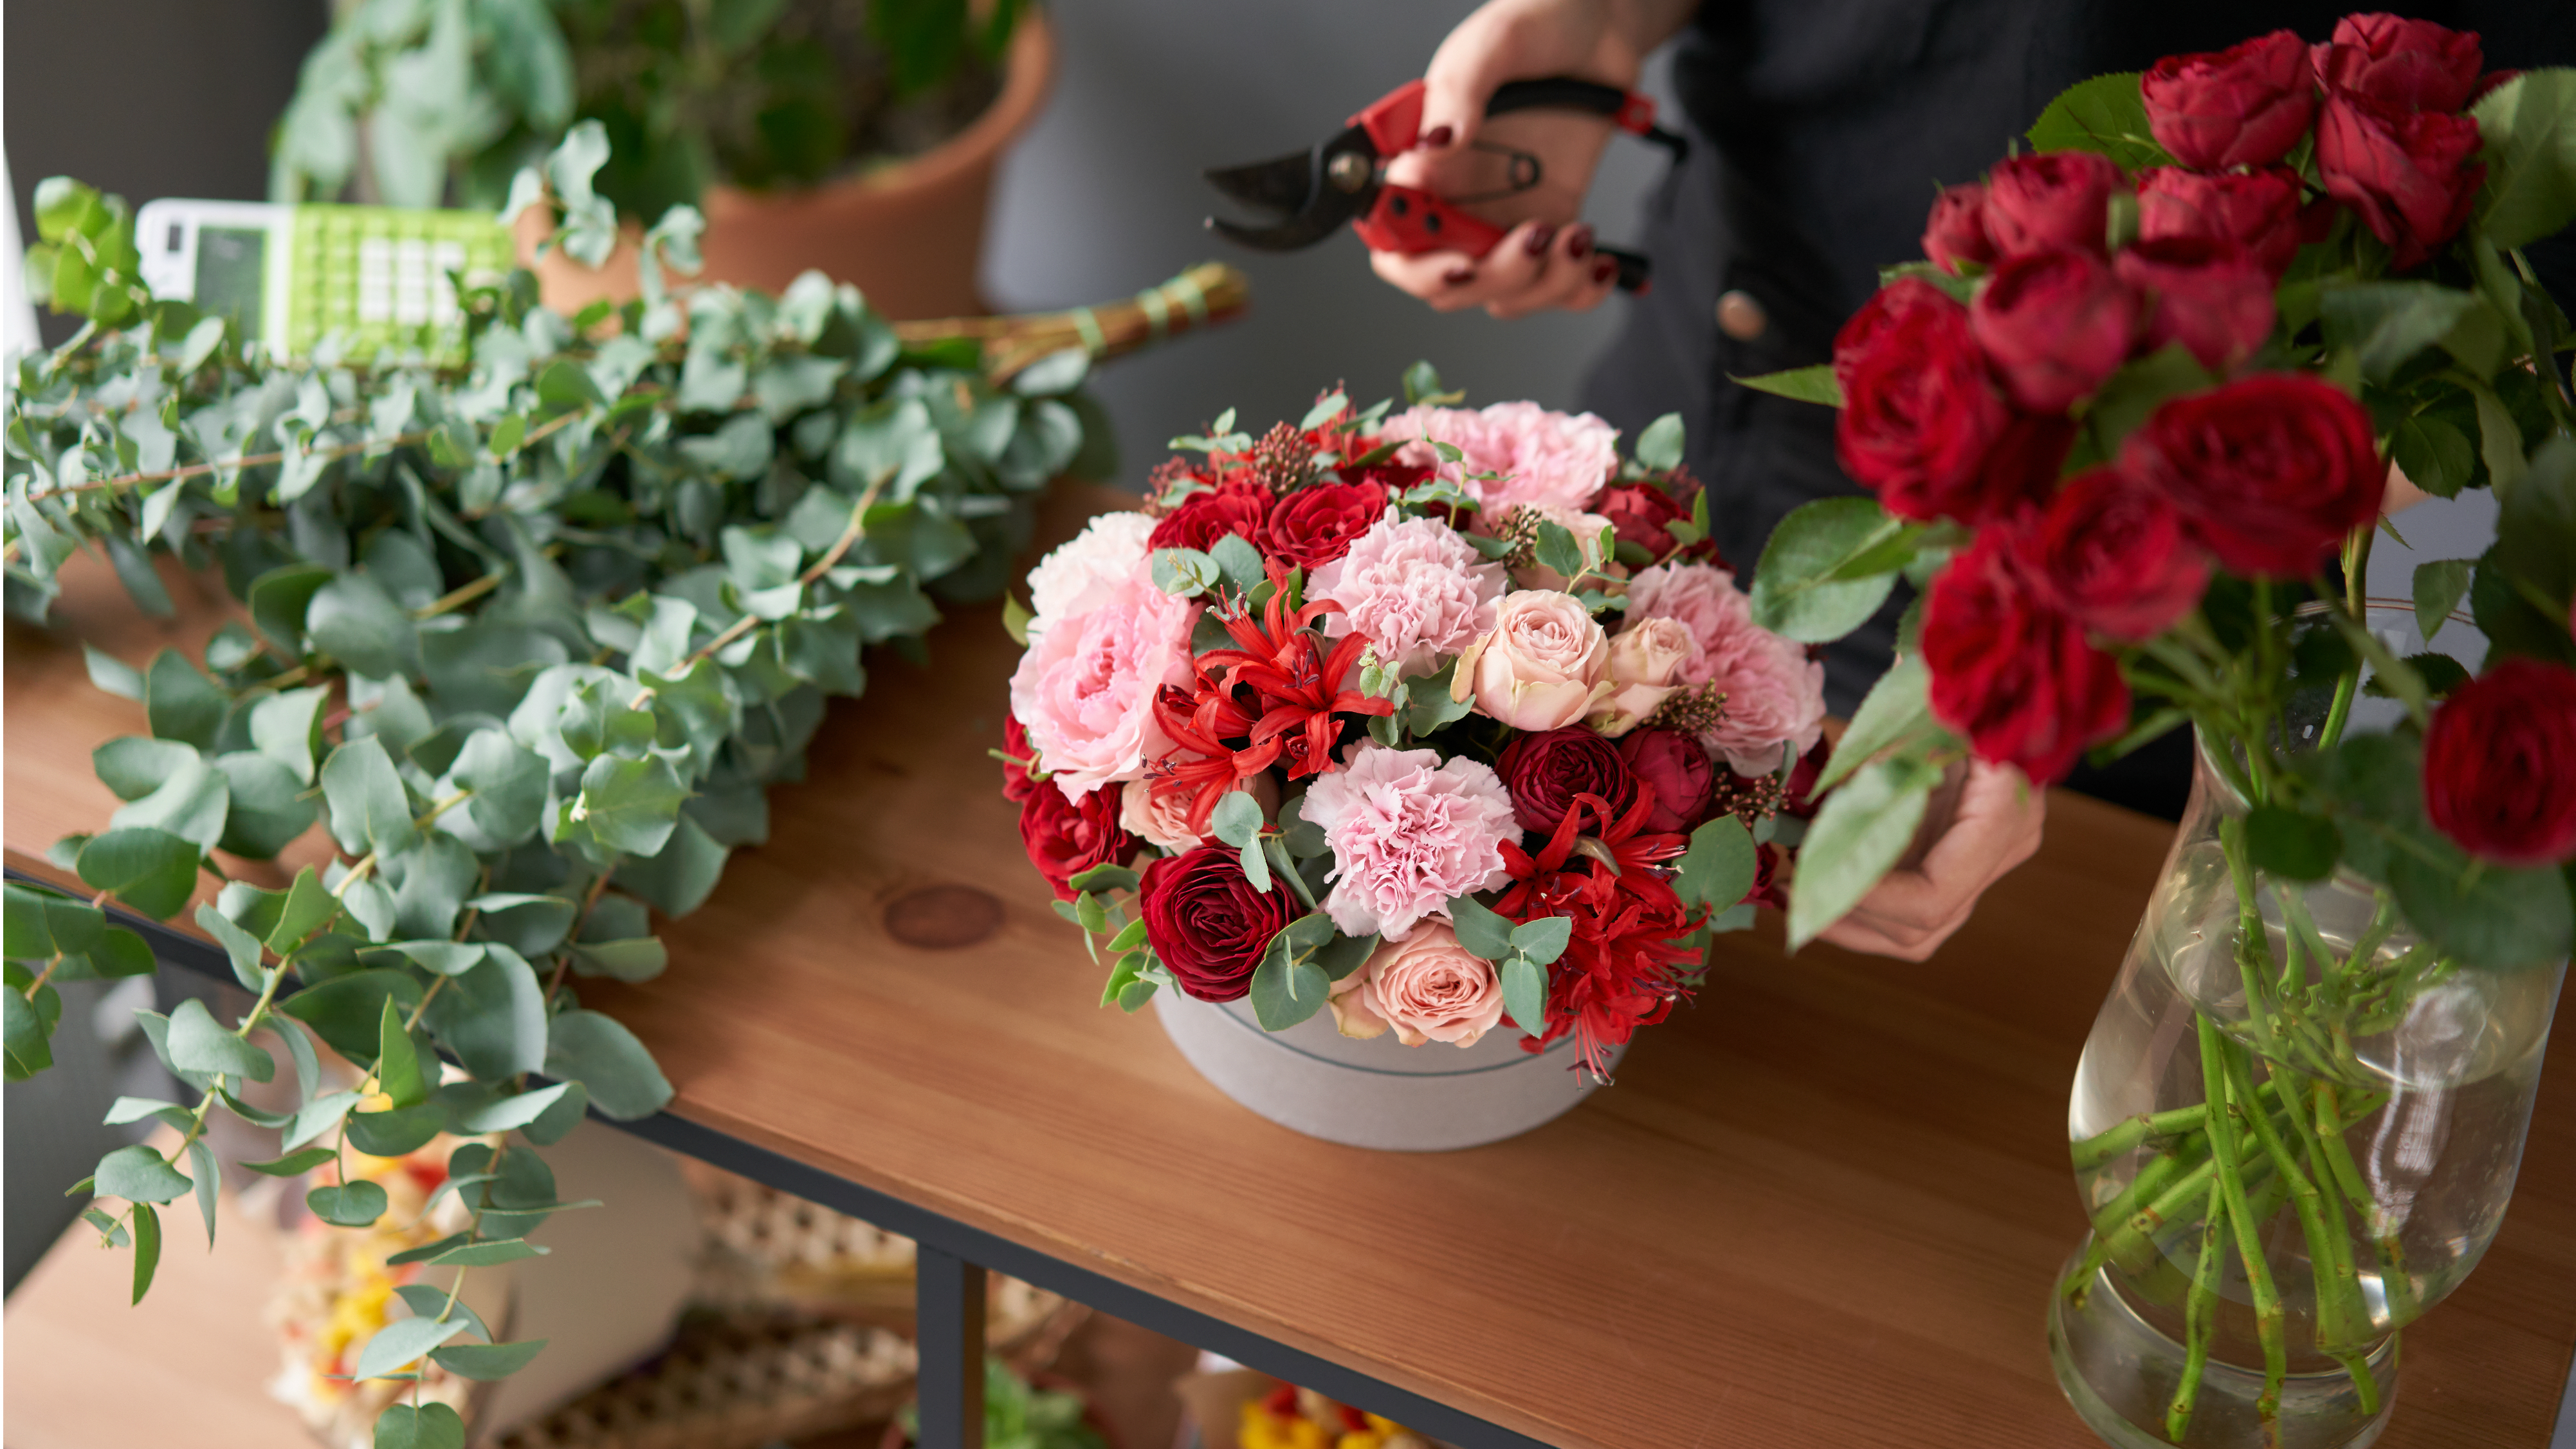 How Important is Timely Flower Delivery?